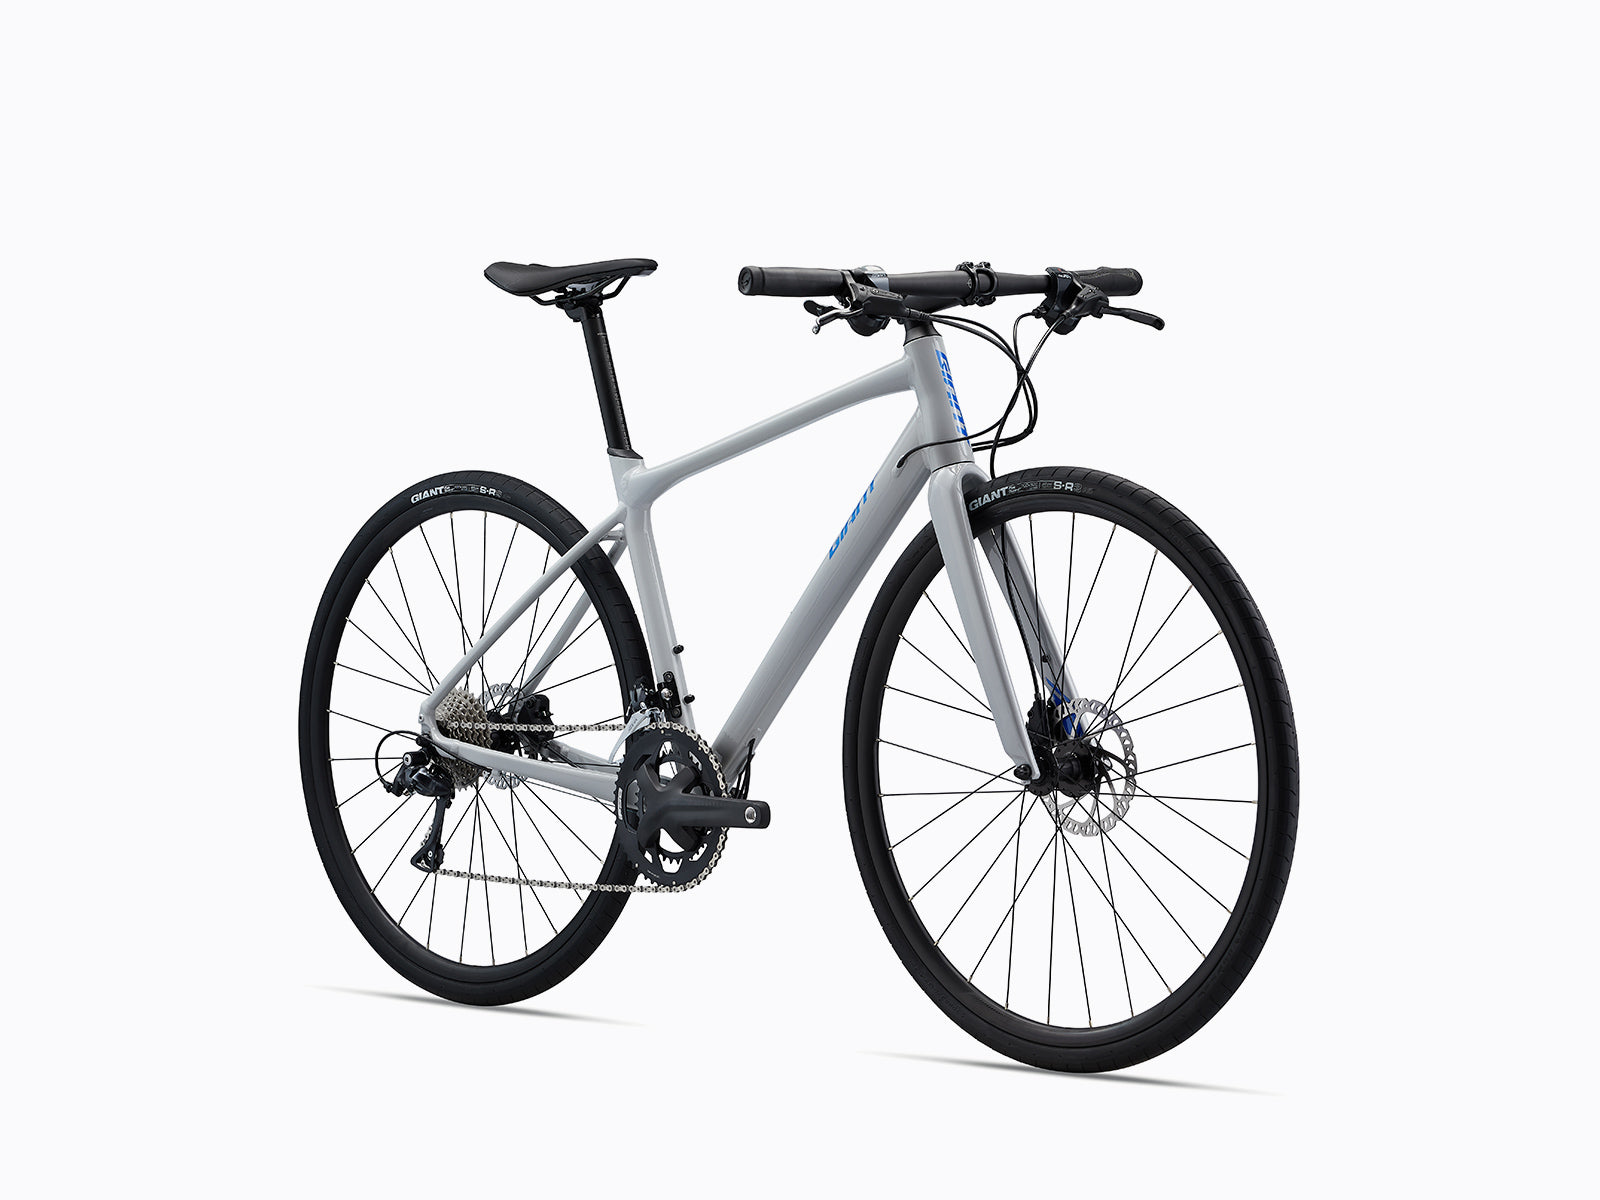 image features a white coloured giant fastroad sl 2, a fitness road bike sold by giant bicycles australia